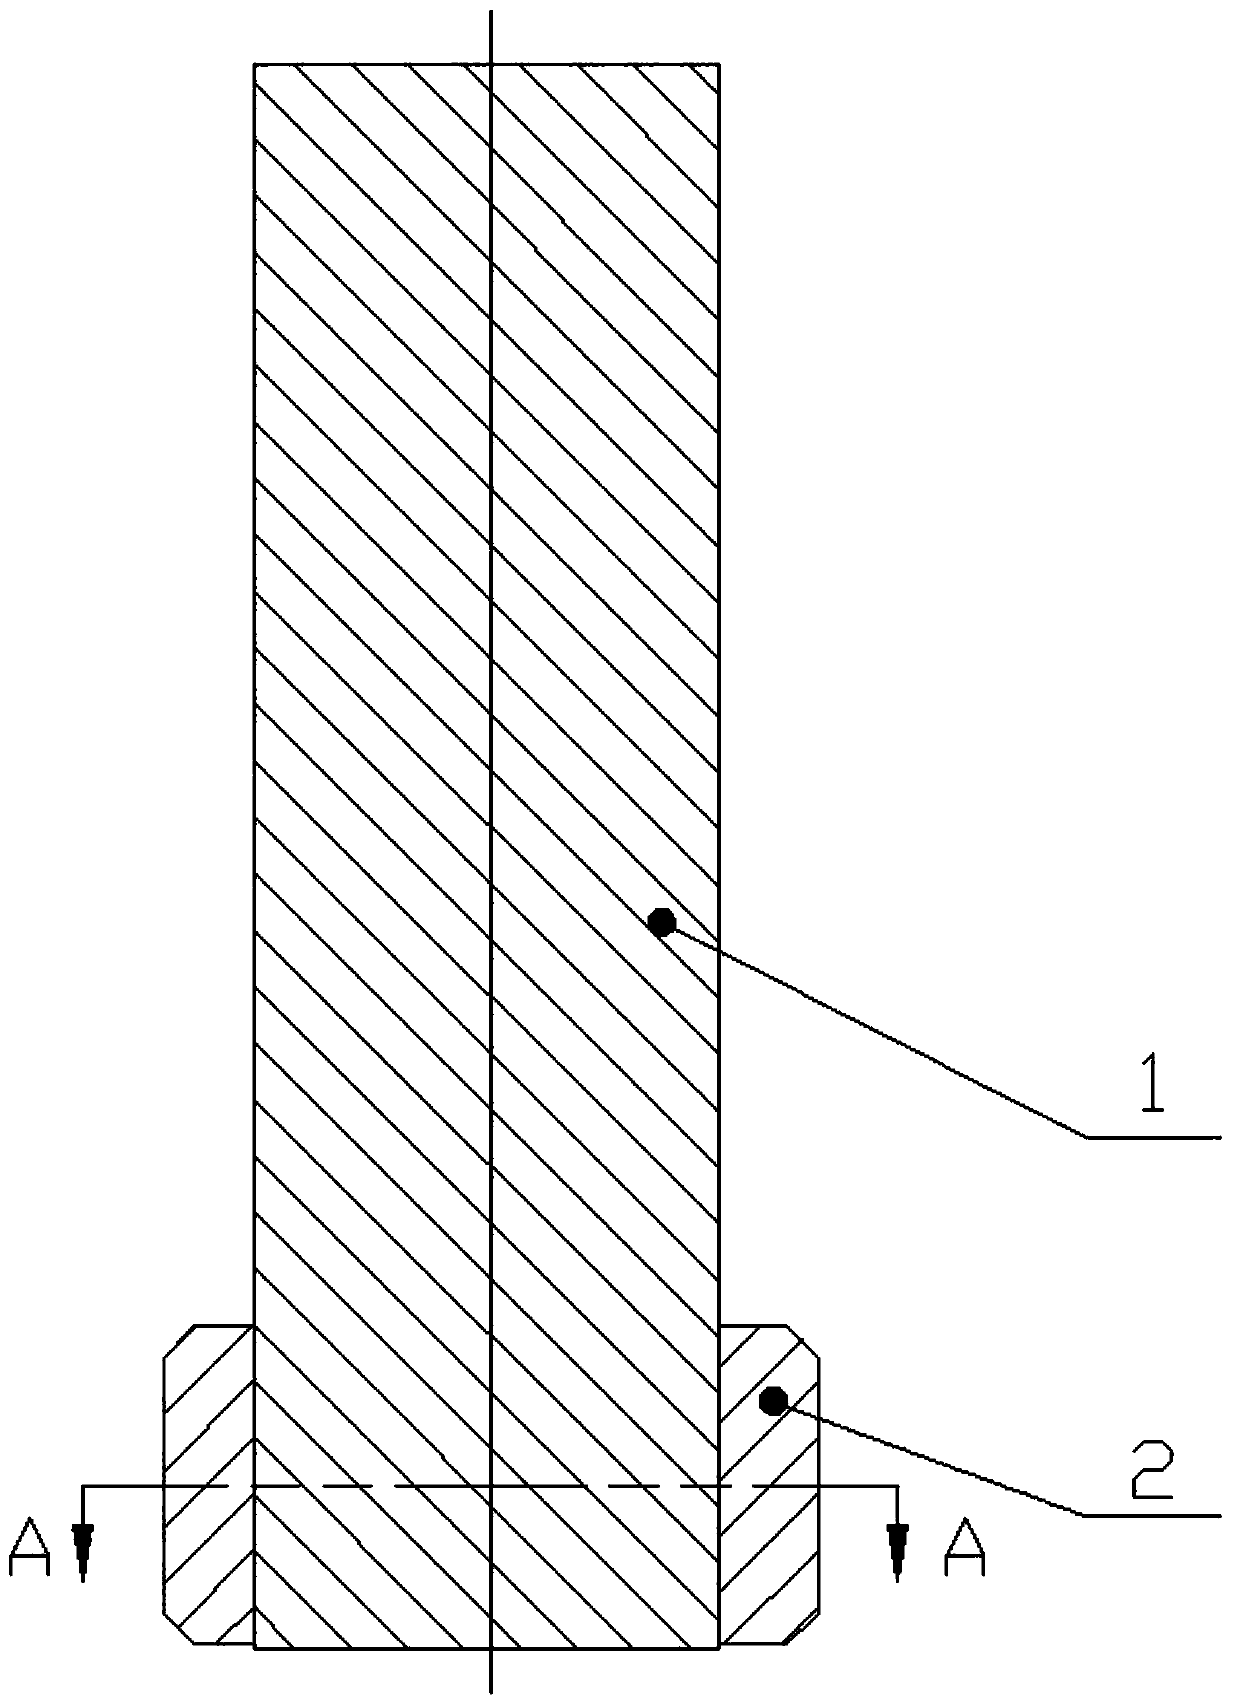 Ejection device suitable for automatic closed forging of steel piston